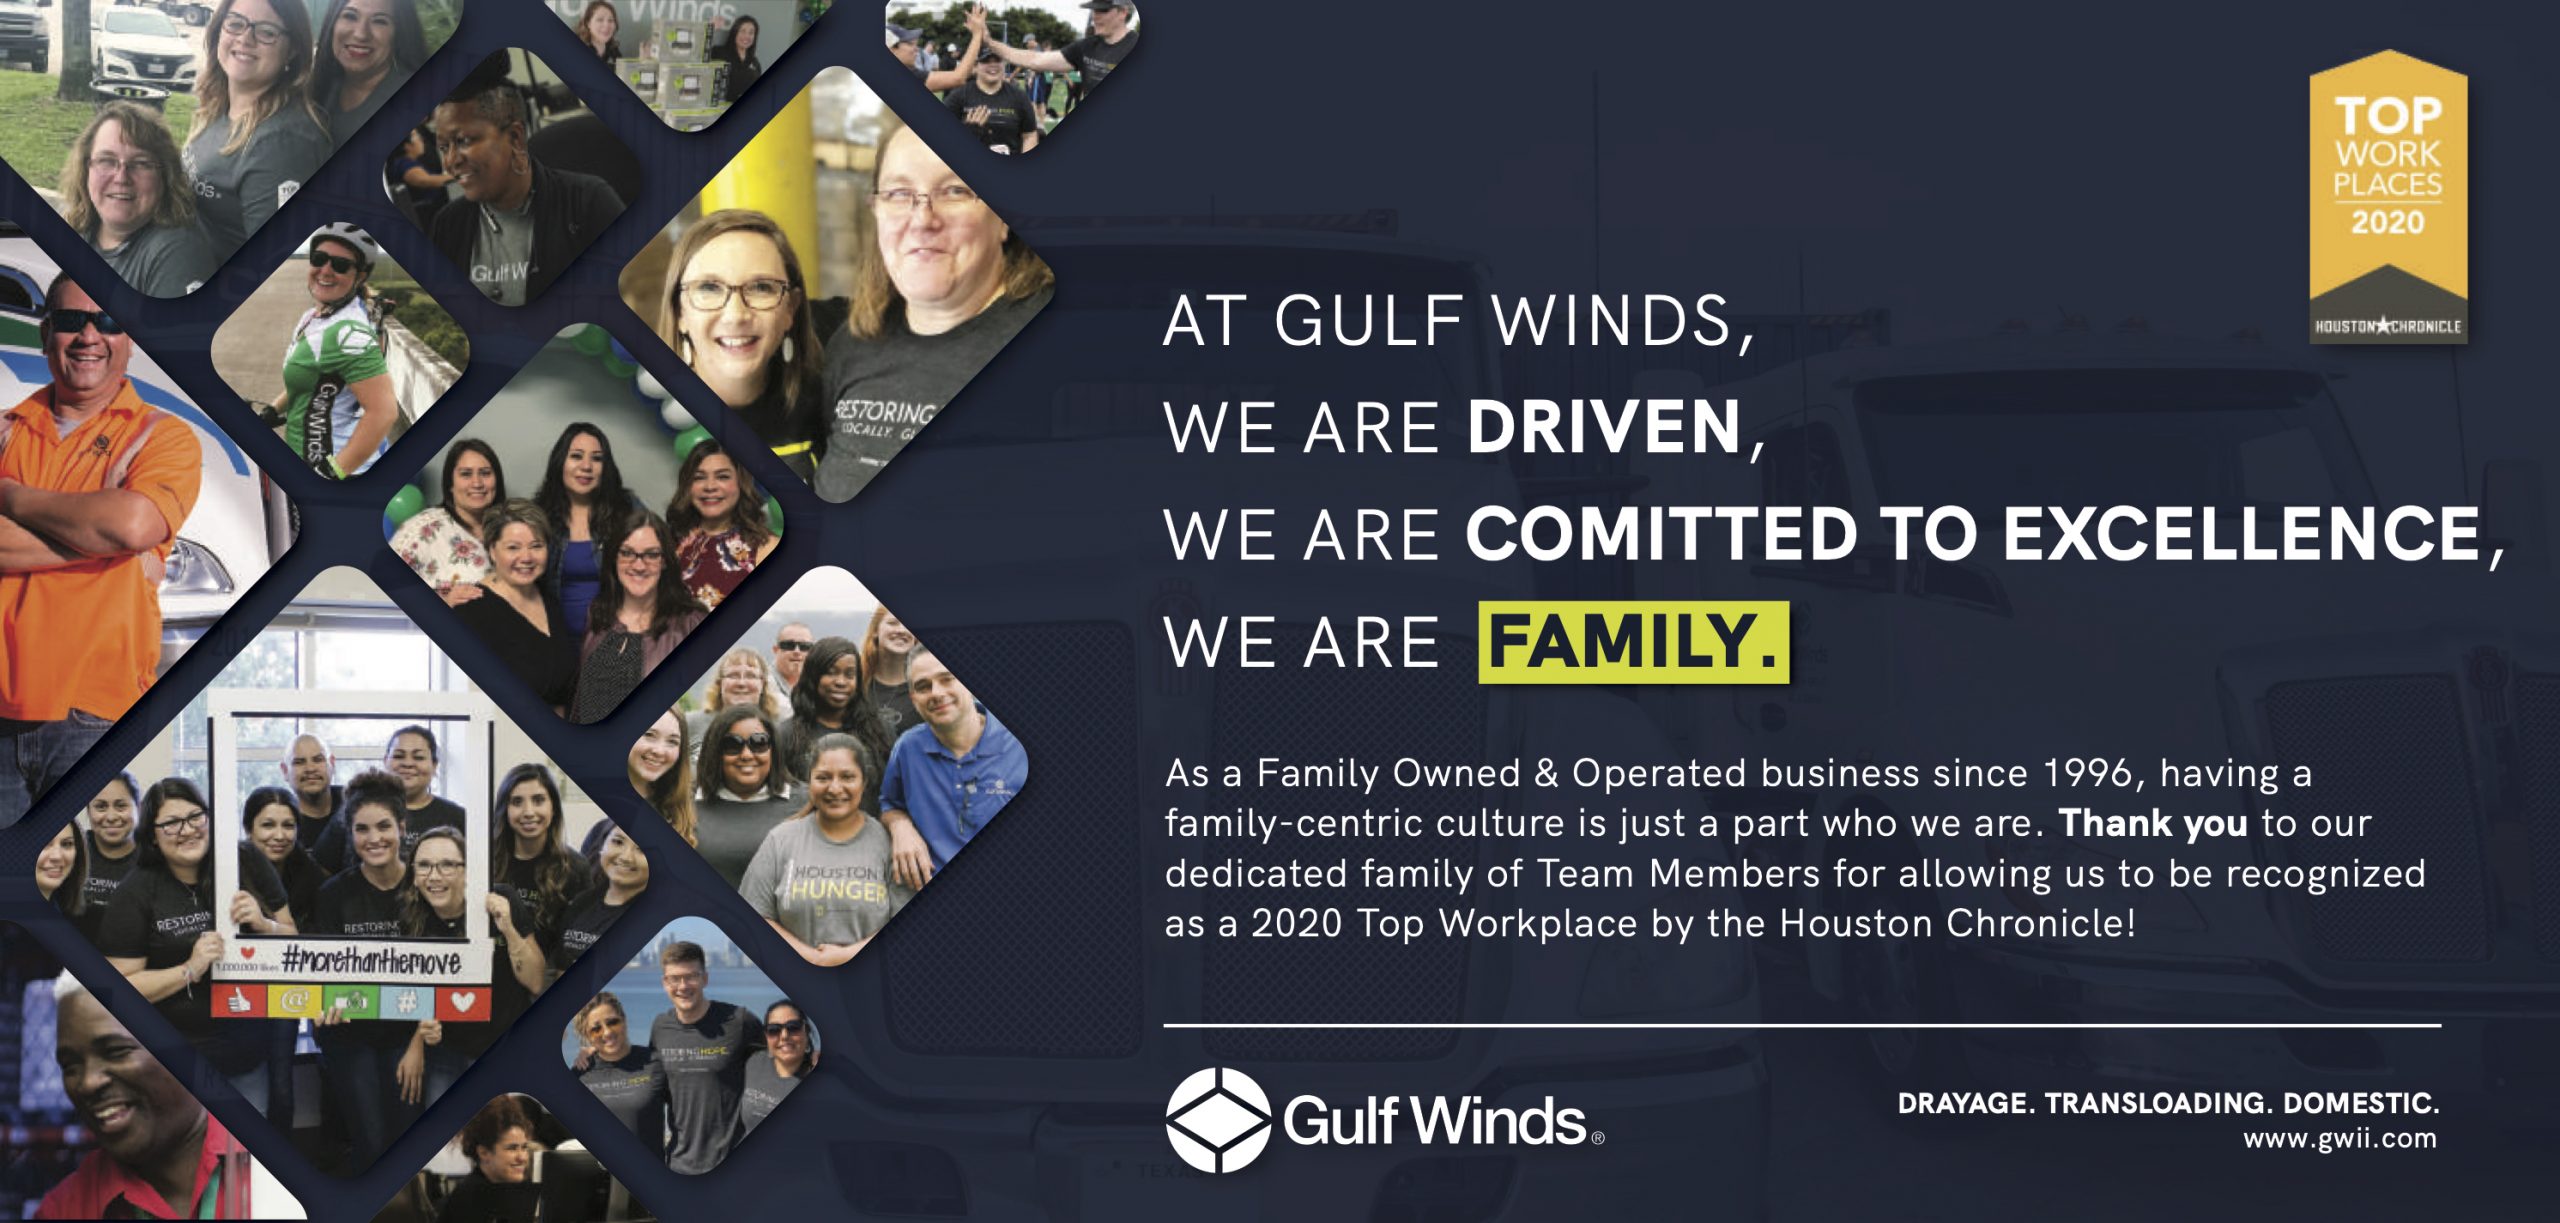 Gulf Winds named a 2020 Top Workplace by the Houston Chronicle 